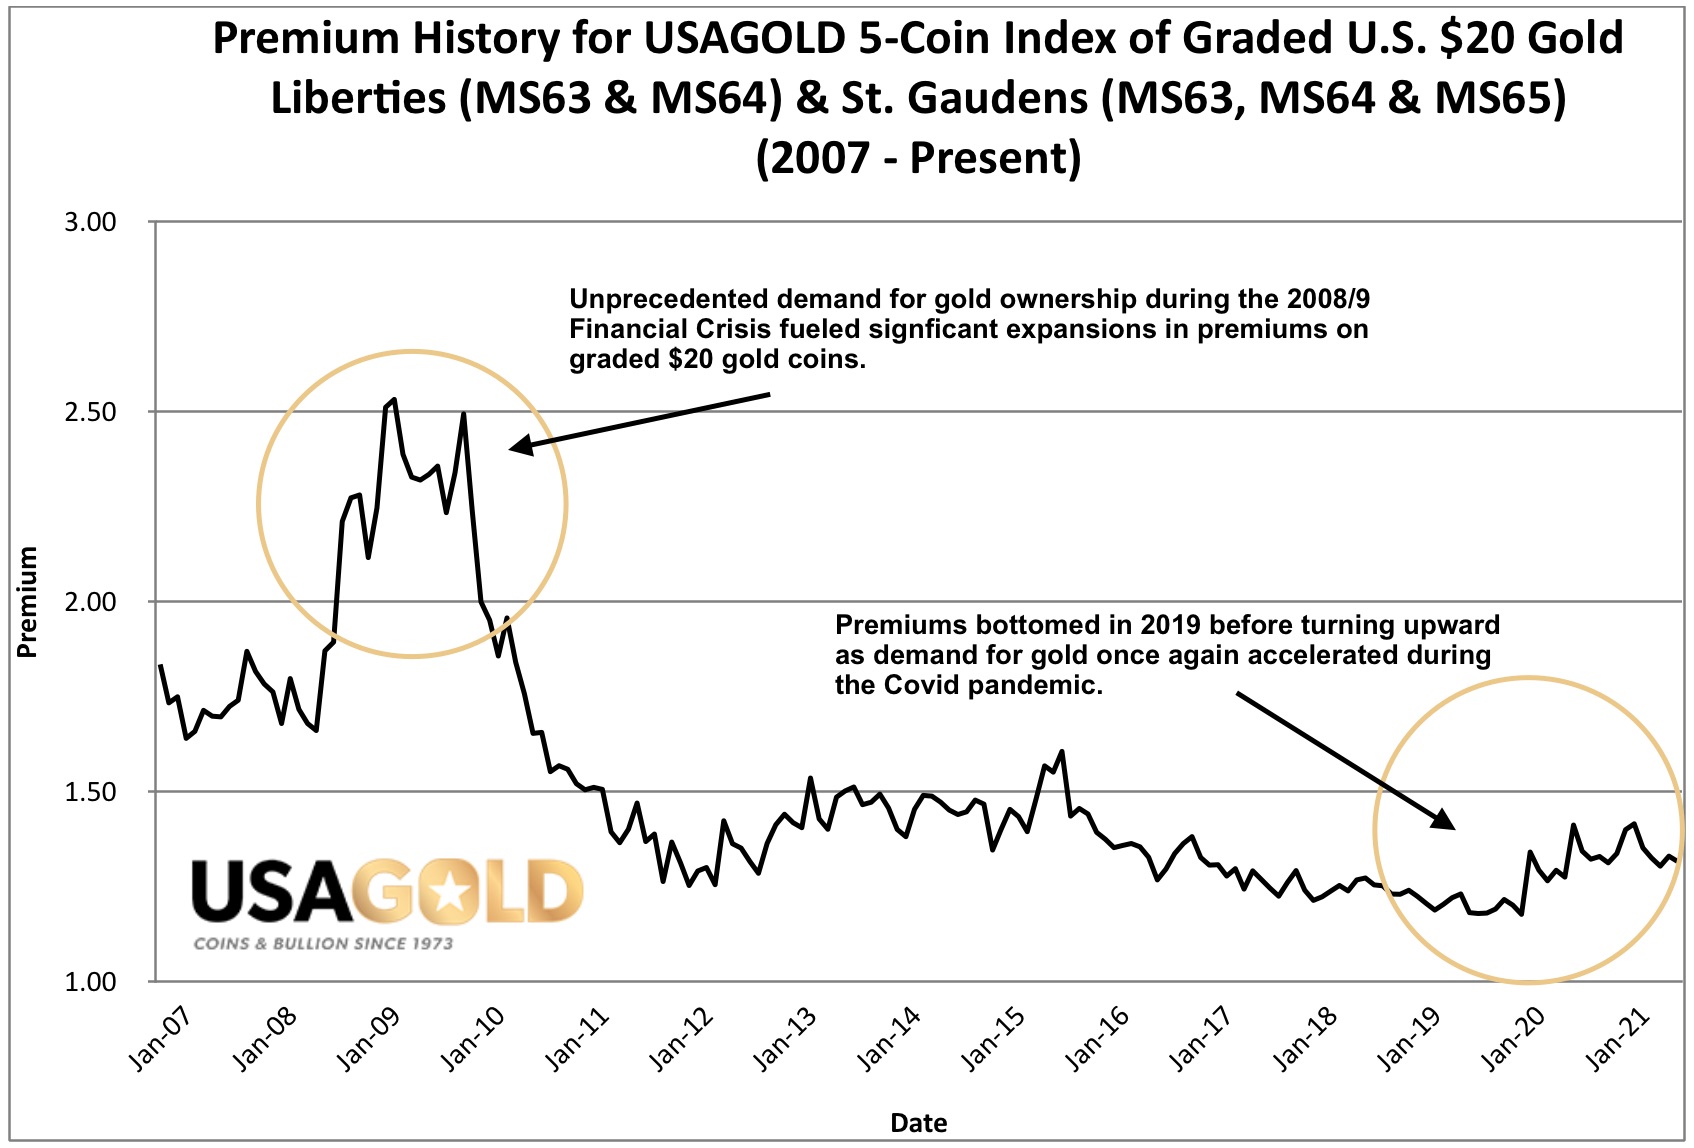 line chart showing the premium history on $20 St. Gaudens graded set 2007 to present